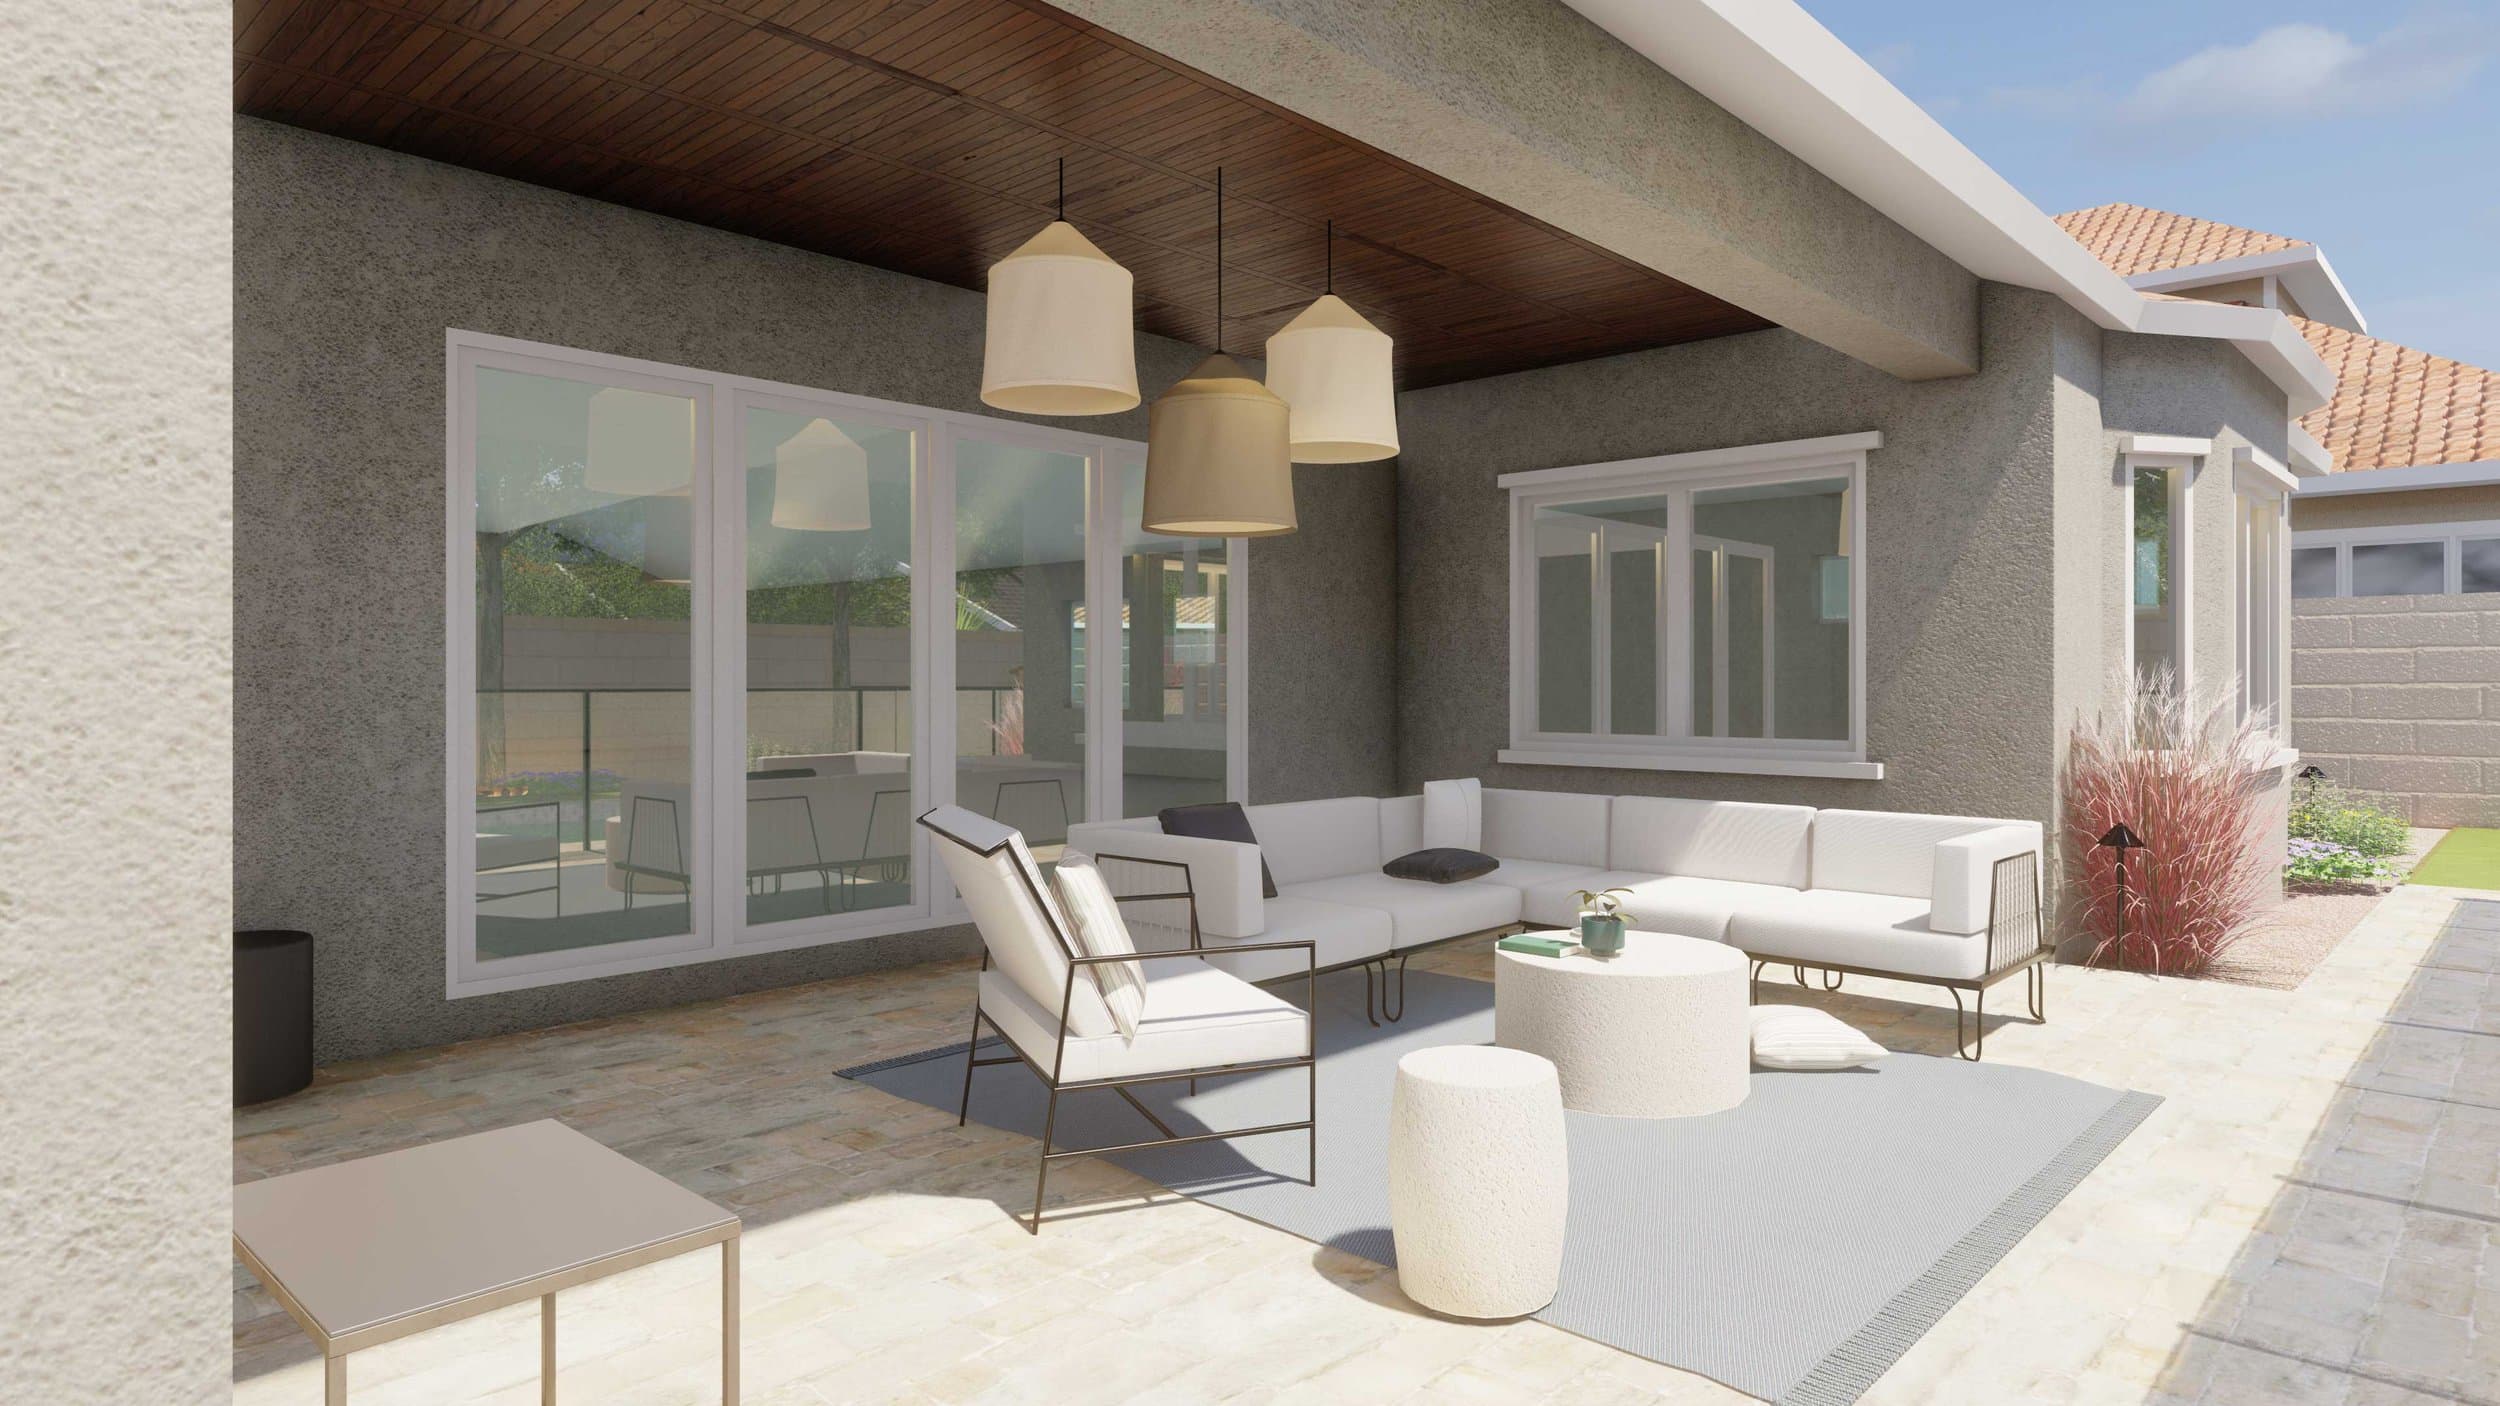 back covered patio with hanging lights and outdoor lounge furniture